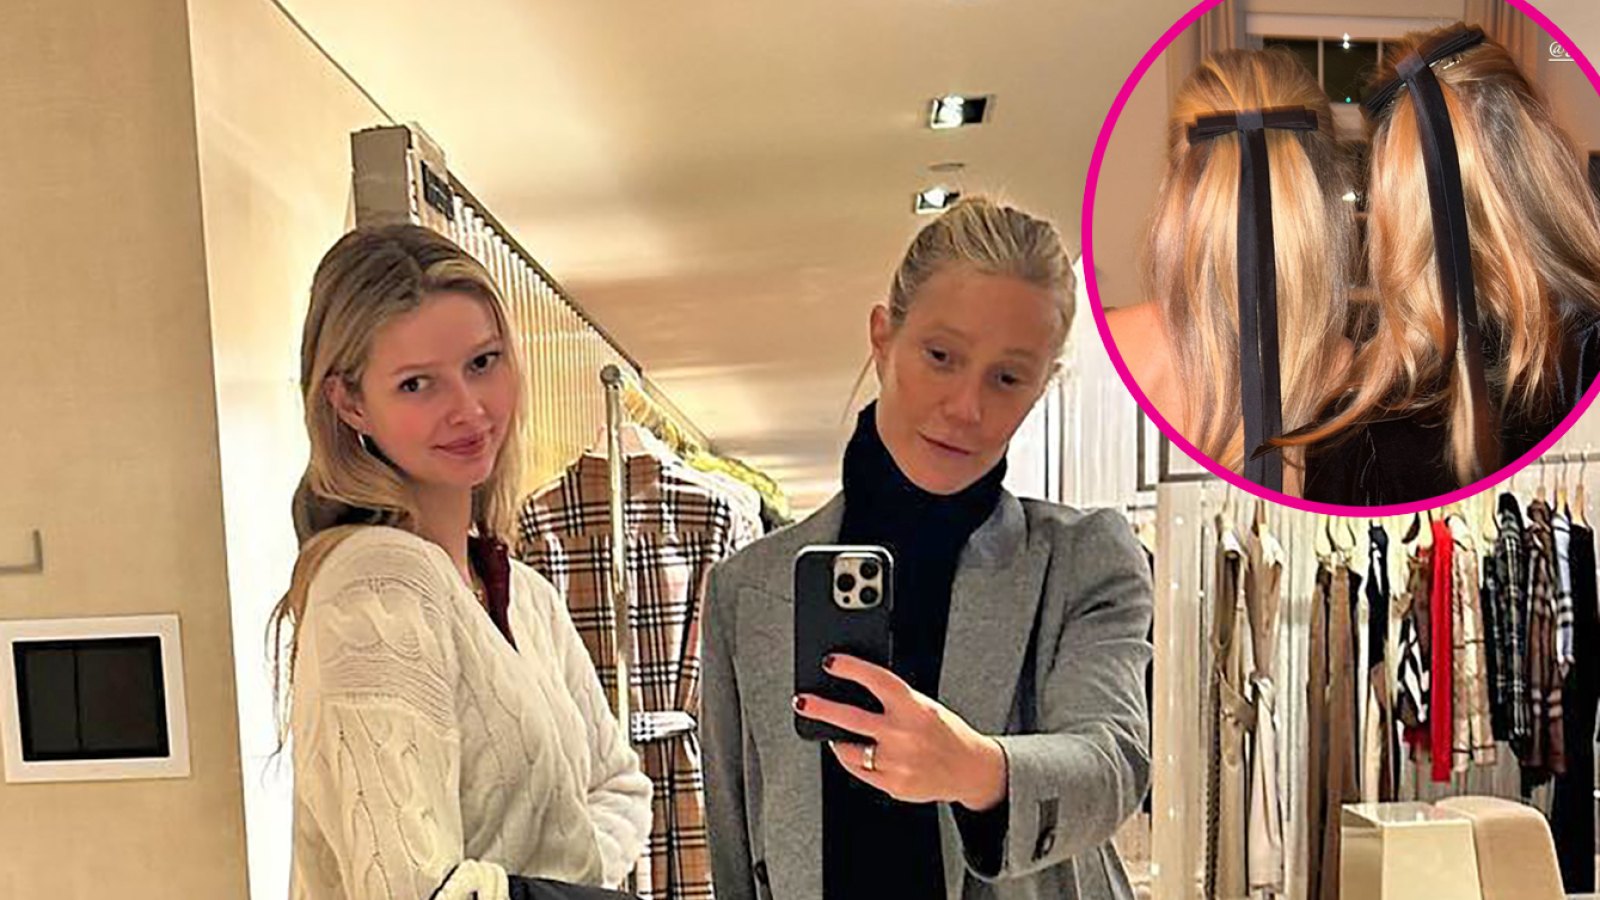 Gwyneth Paltrow and Apple Martin Wear Matching Velvet Bows on Thanksgiving